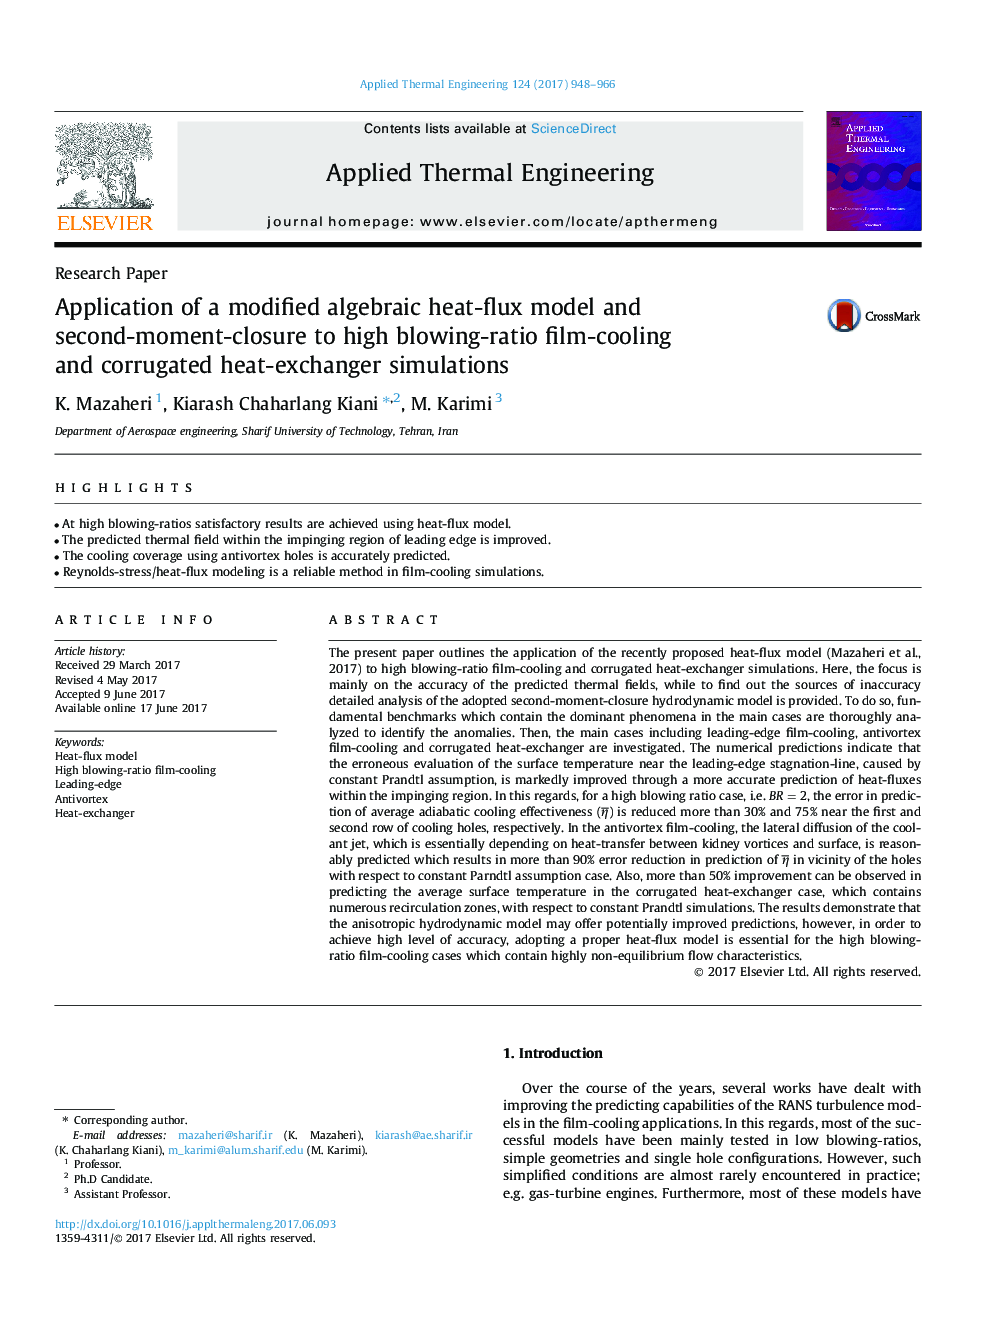 Application of a modified algebraic heat-flux model and second-moment-closure to high blowing-ratio film-cooling and corrugated heat-exchanger simulations